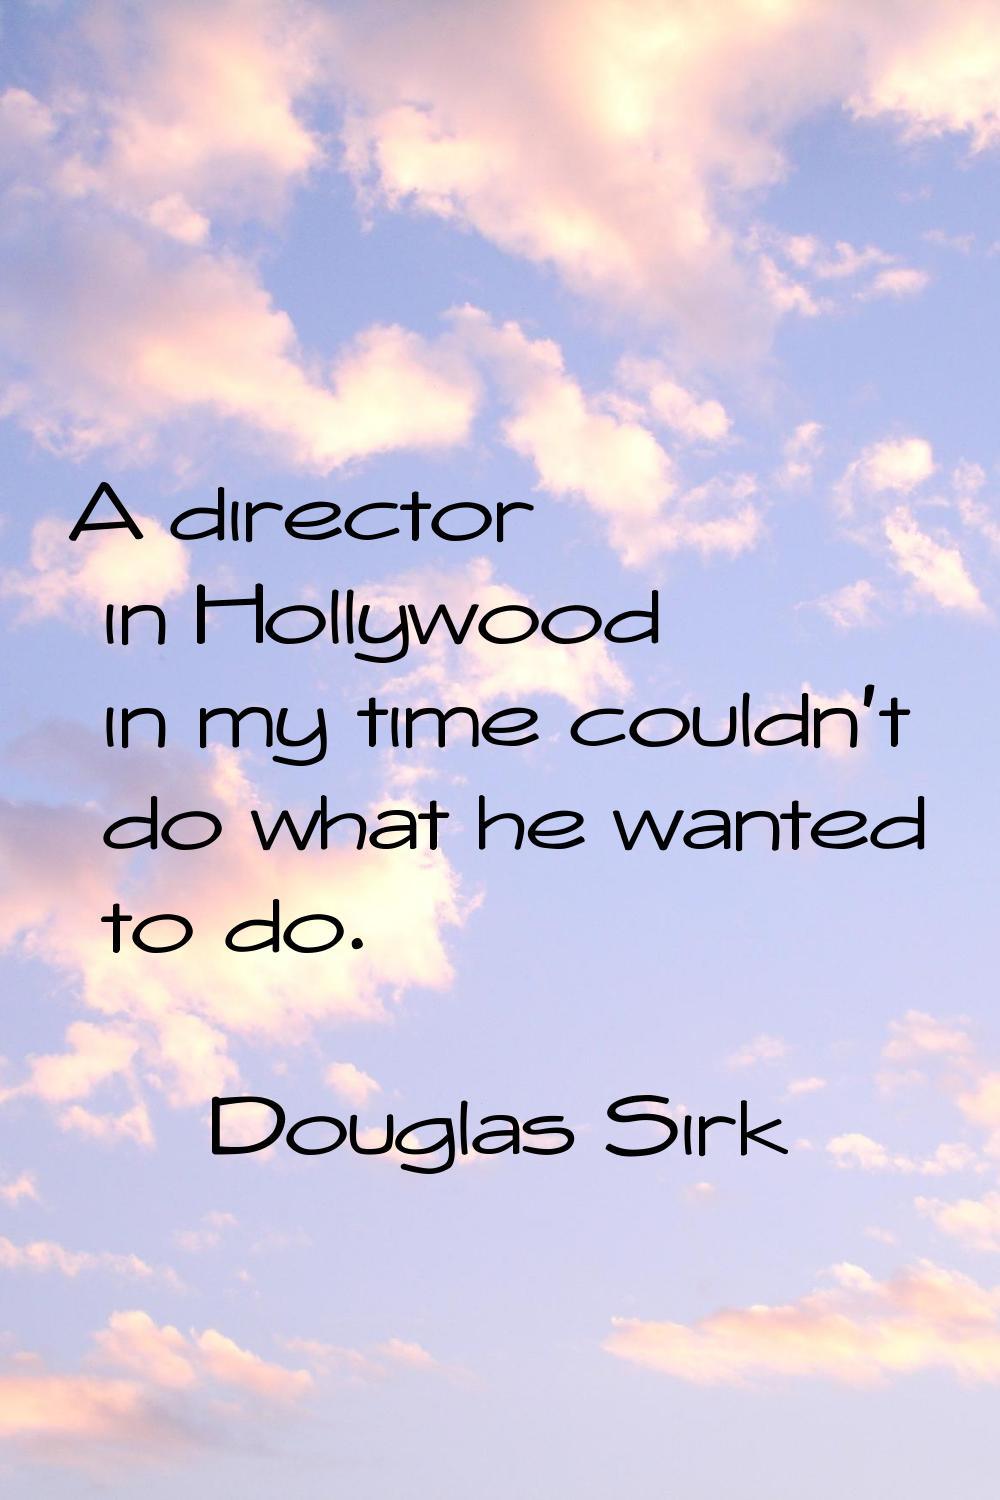 A director in Hollywood in my time couldn't do what he wanted to do.